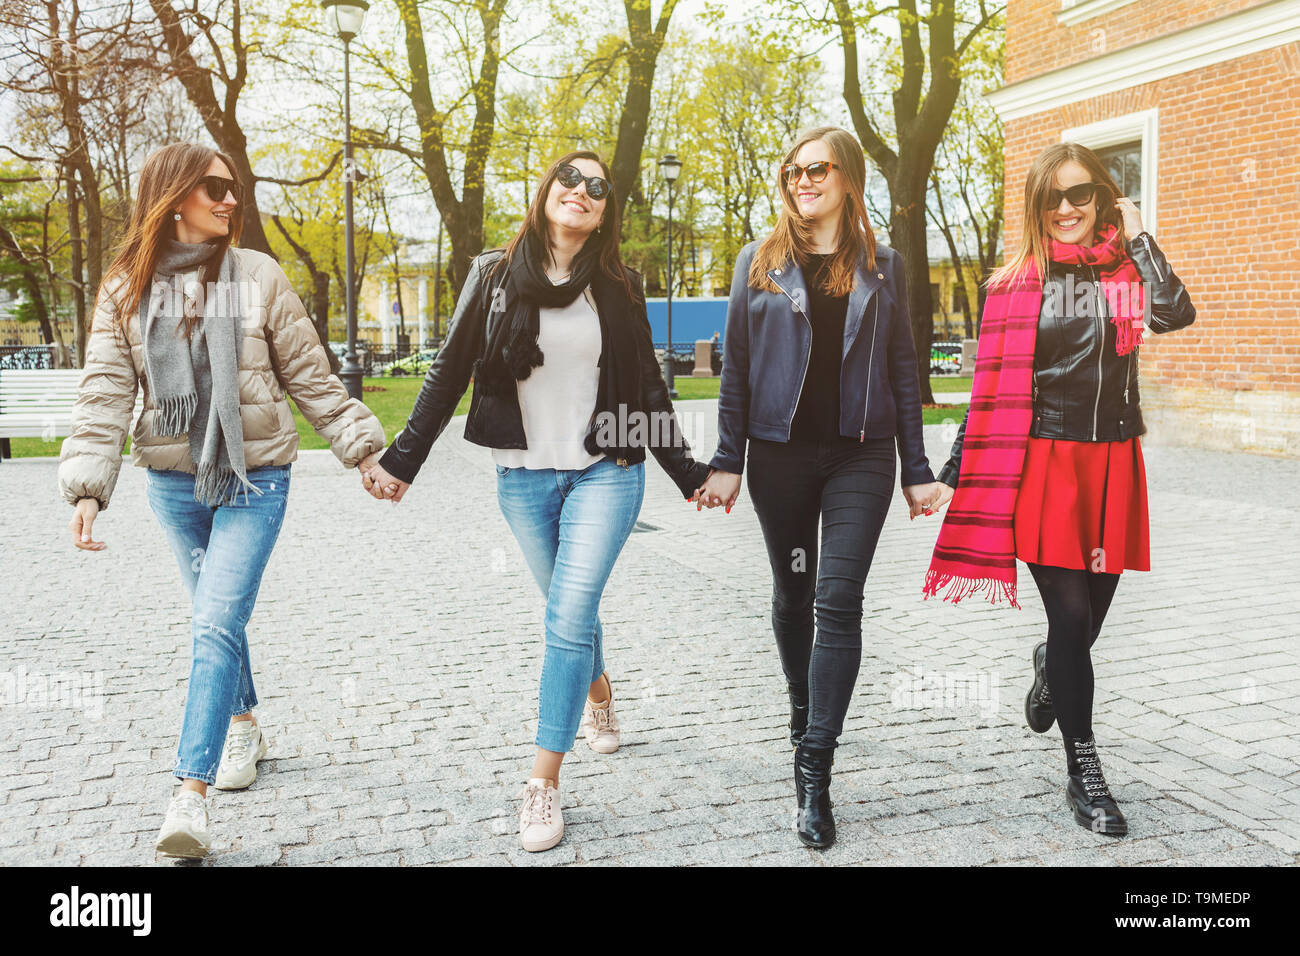 Four cheerful and beautiful women walk, holding hands, on the spring city in sunglasses. The concept of female friendship and power. Stock Photo